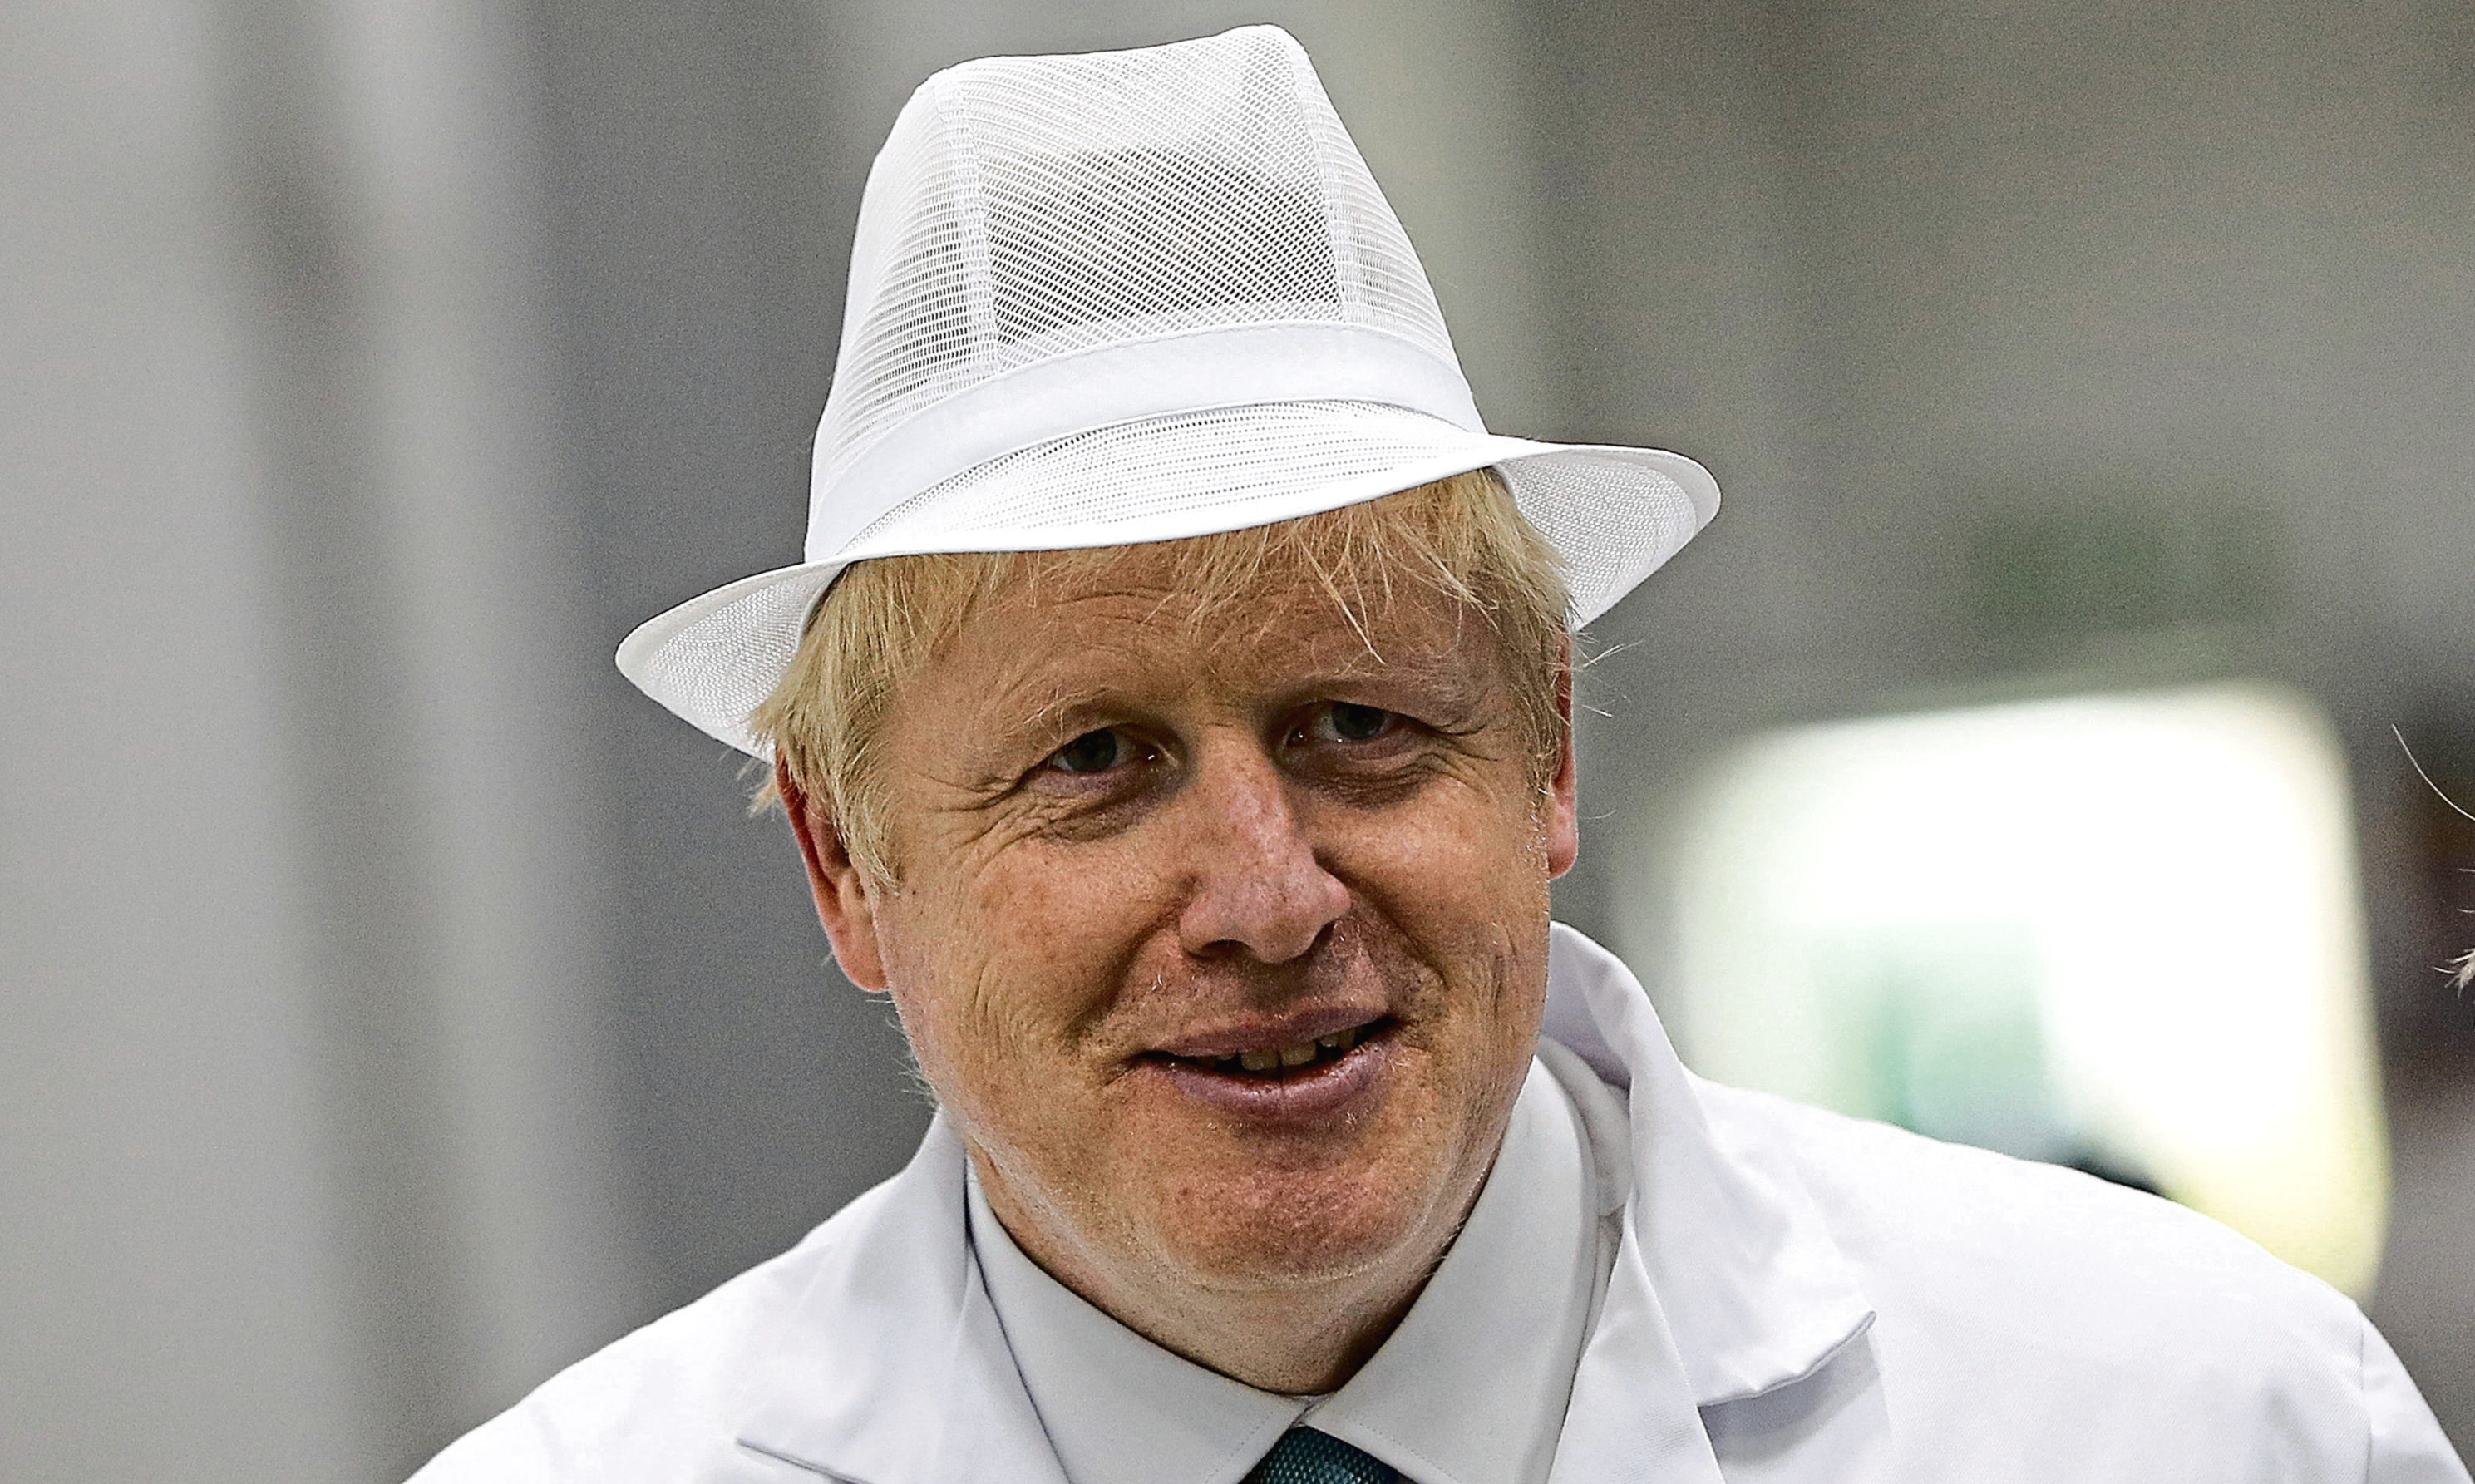 Conservative party leadership candidate Boris Johnson during a visit to Heck Foods Ltd. headquarters near Bedale in North Yorkshire.